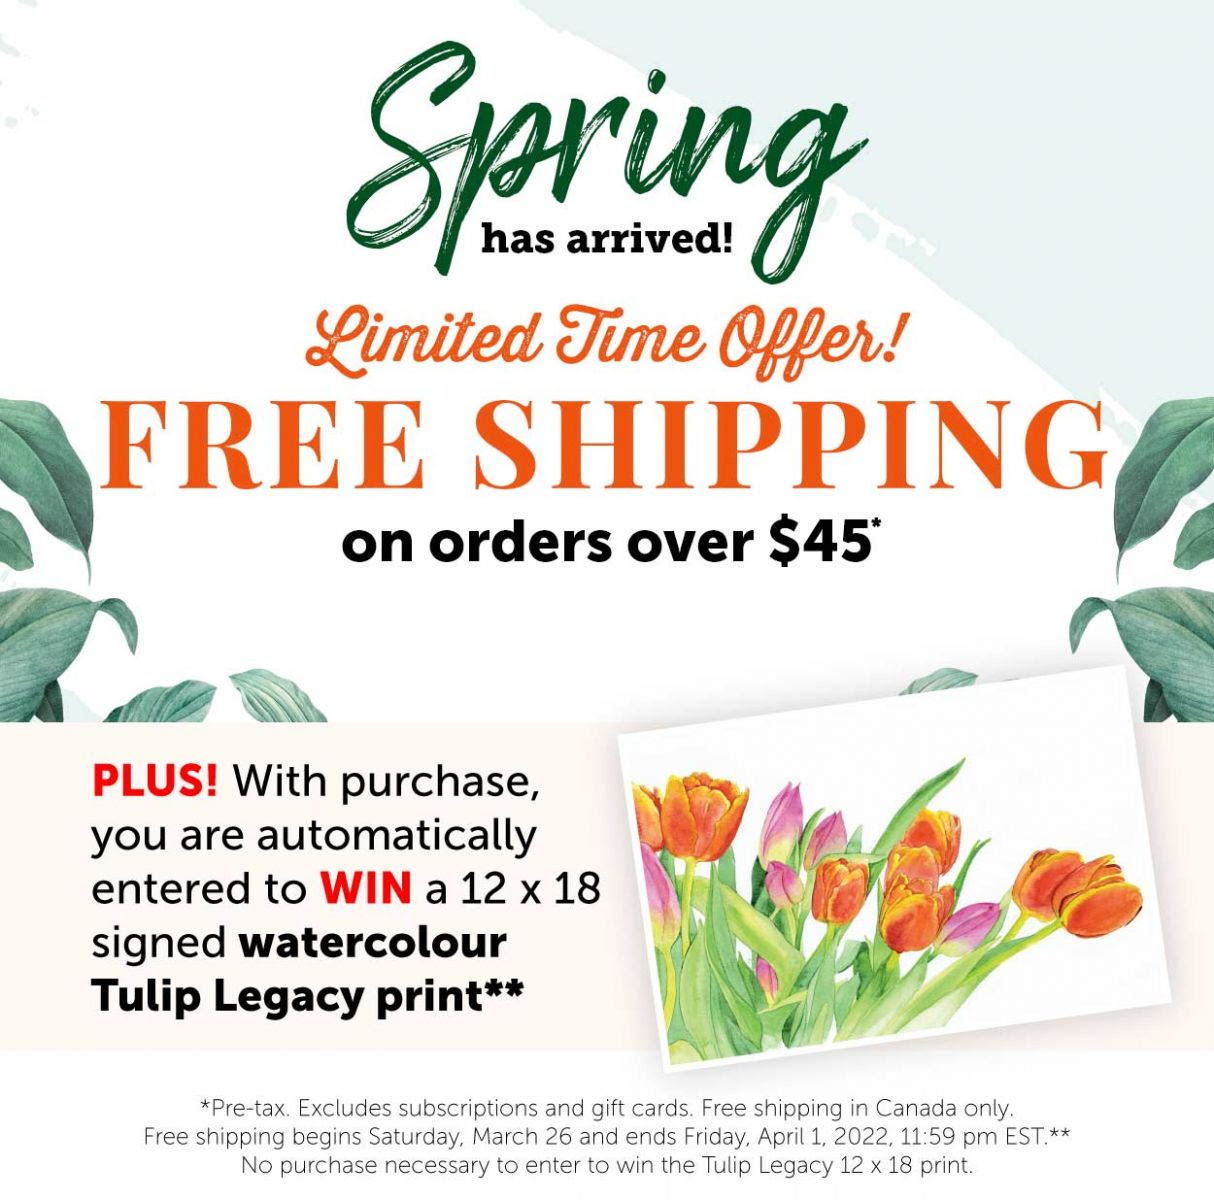 Limited Time Offer! FREE SHIPPING on order over $45*